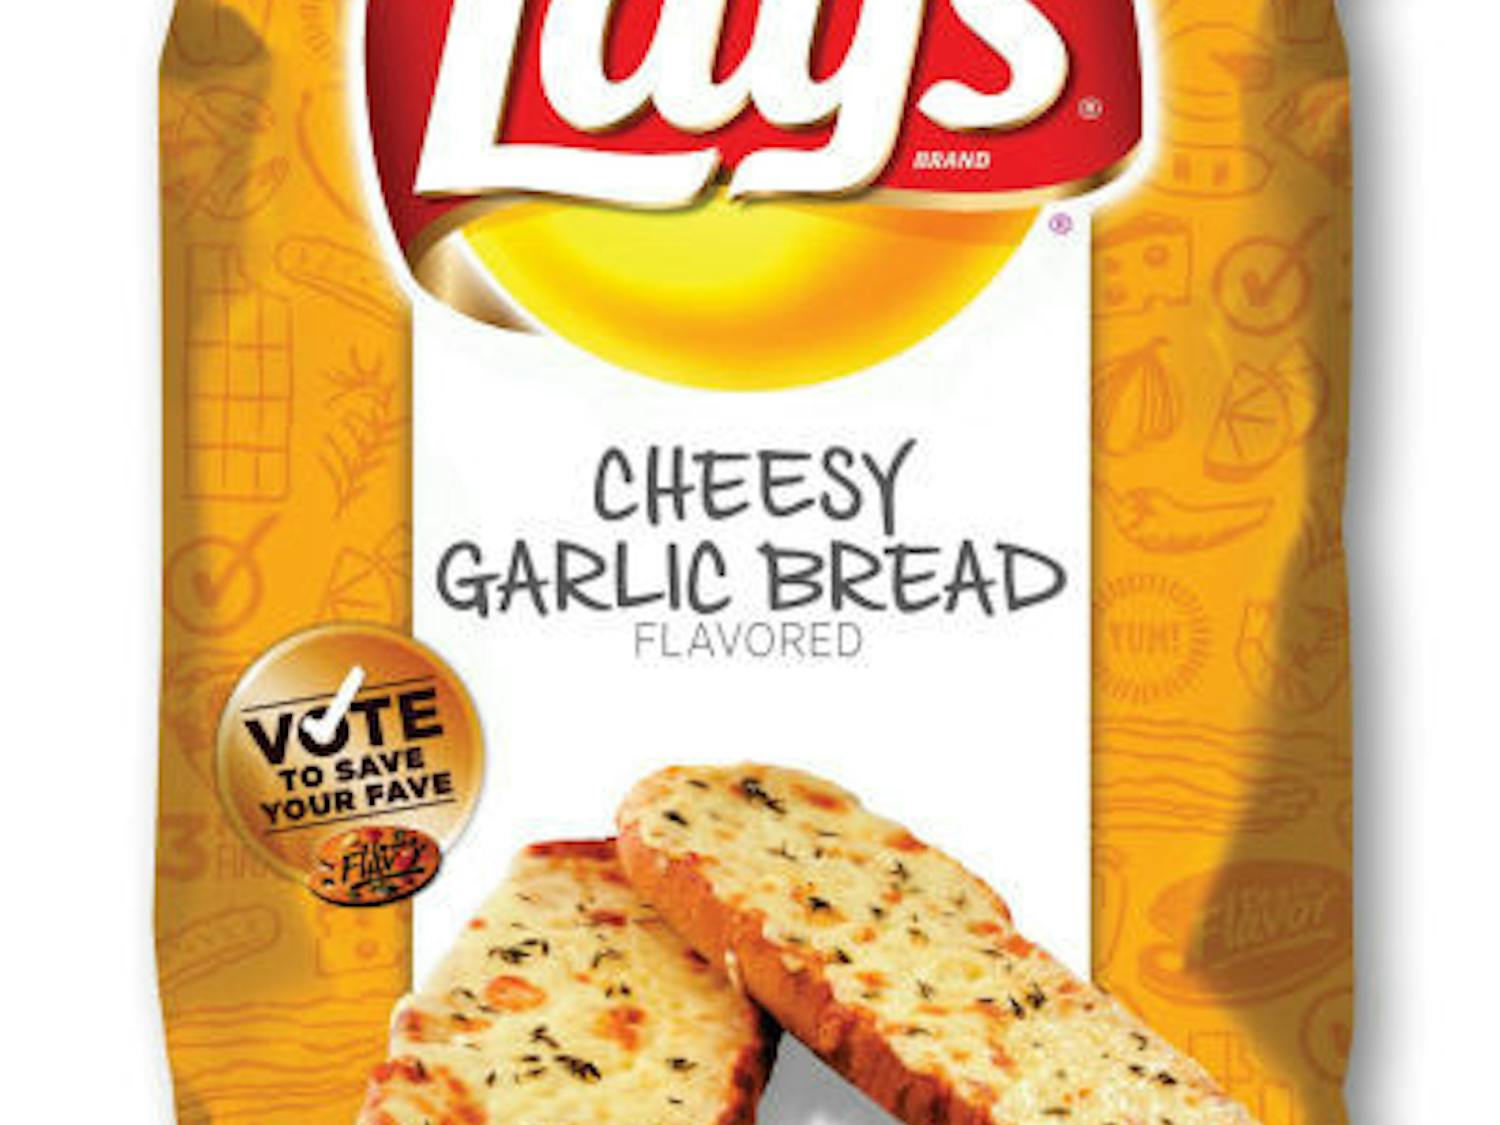 This product photo provided by Lay's shows a bag of their Cheesy Garlic Bread flavored potato chips. The new flavor, along with two others - Chicken &amp; Waffles and the Thai-inspired Sriracha - will be sold at retailers nationwide starting in mid-February 2013. After trying them, fans have until May to vote for their favorite. The flavor with the most votes in May will stay on store shelves. The other two will be discontinued. (AP Photo/Lay's)